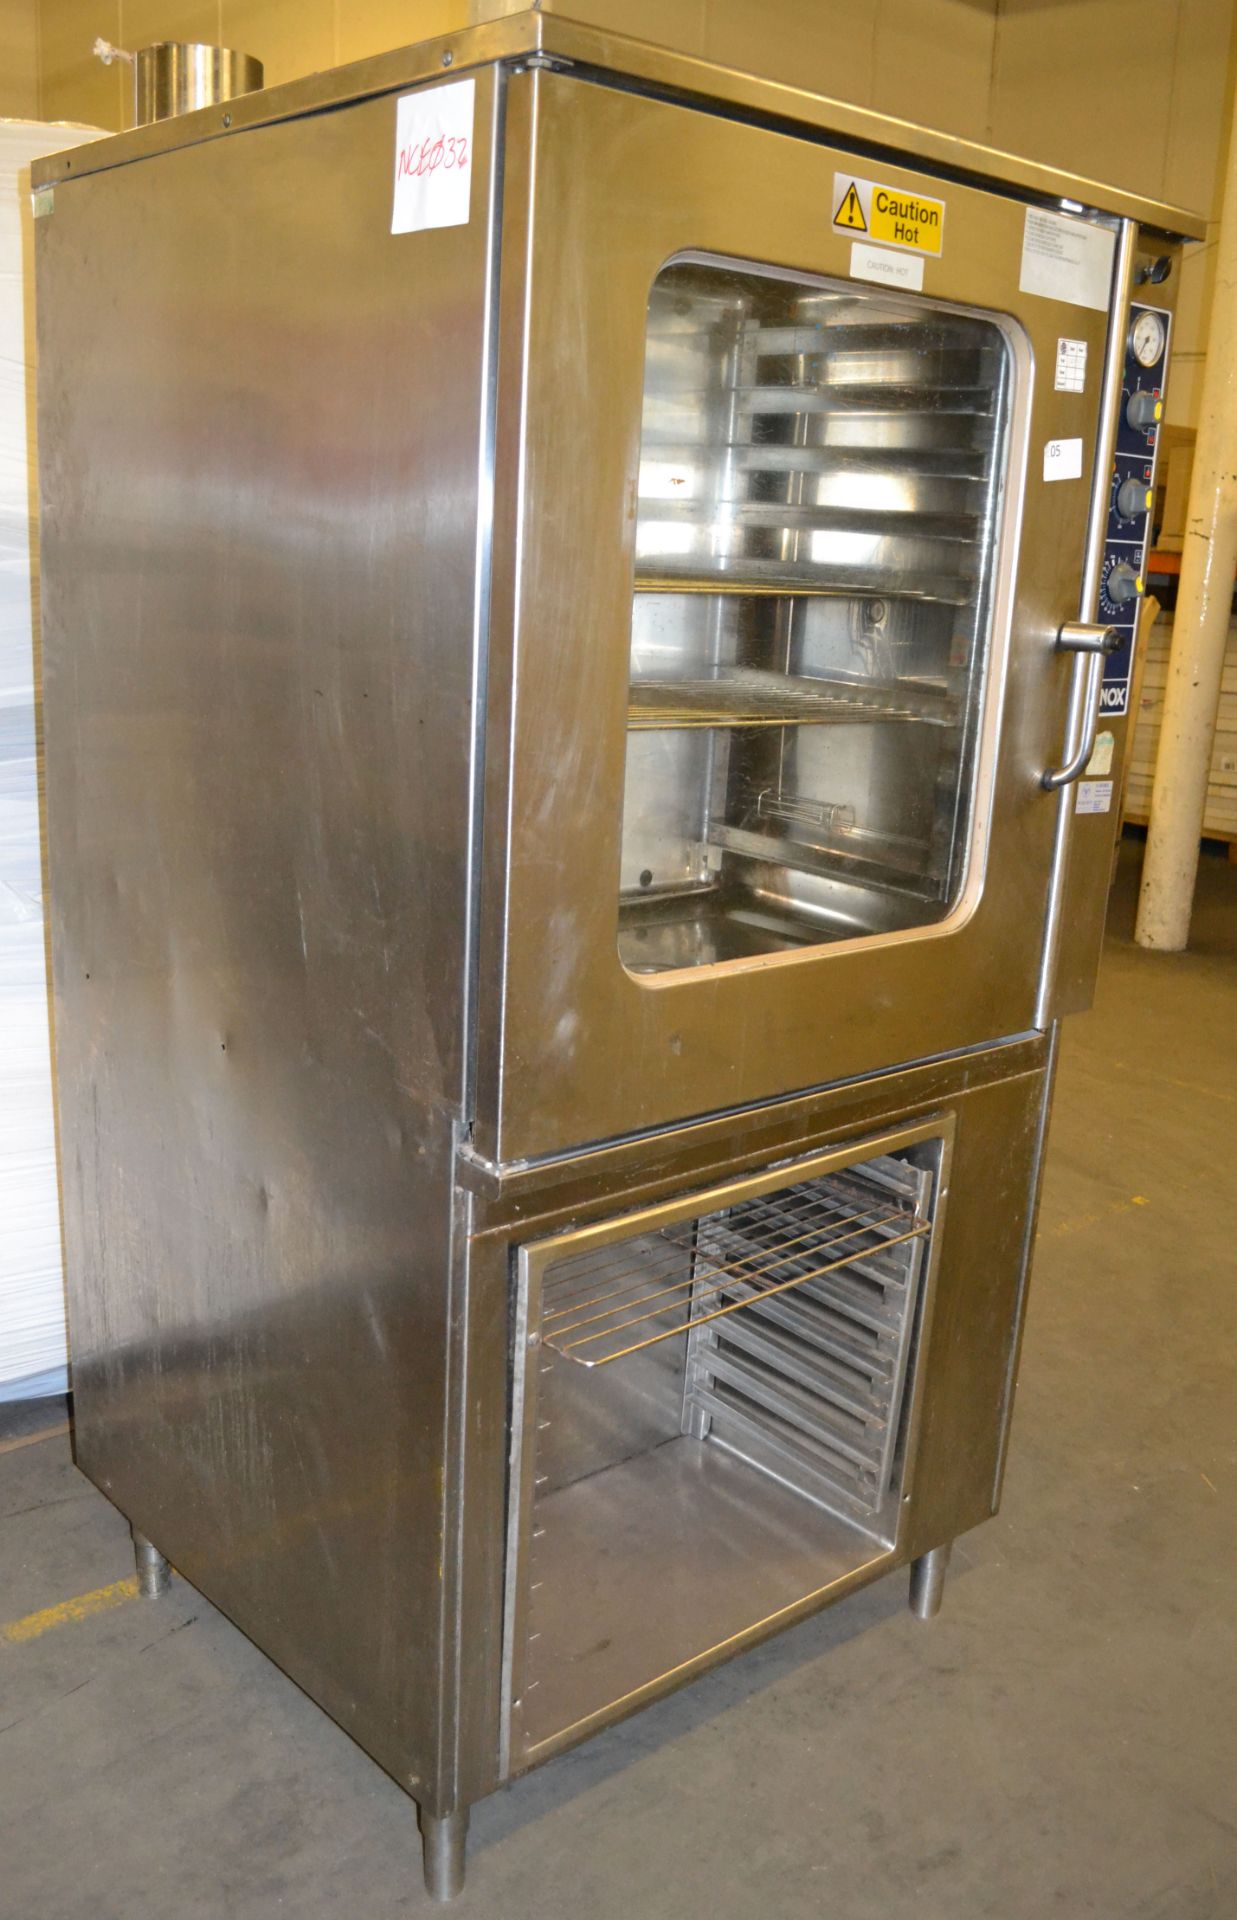 1 x Lainox MG110M LX Type Combination Oven with Pan Capacity - Ref:NCE032 - CL007 - Location: Bolton - Image 14 of 15